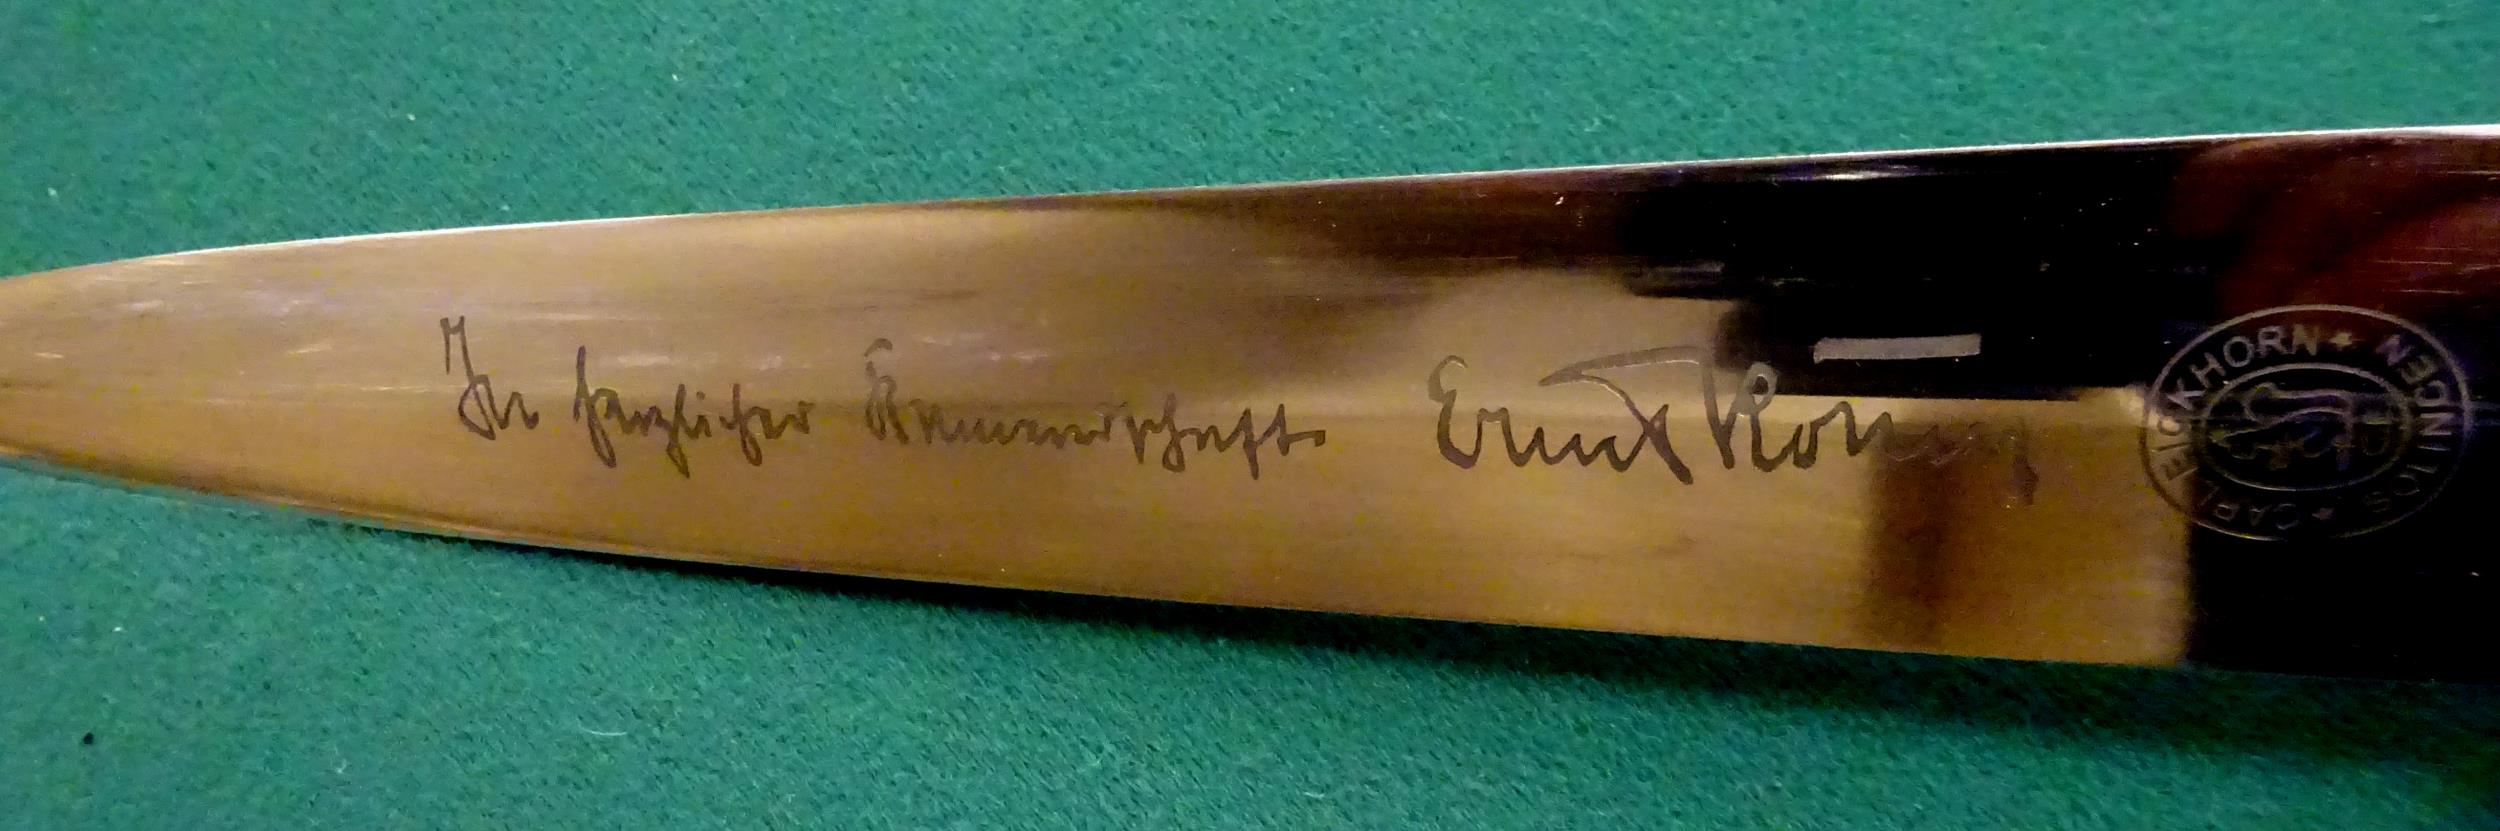 A Third Reich SA dagger with full Ernst Rohm inscription, with pre 1935 Carl Eickhorn mark, nickel - Image 6 of 6